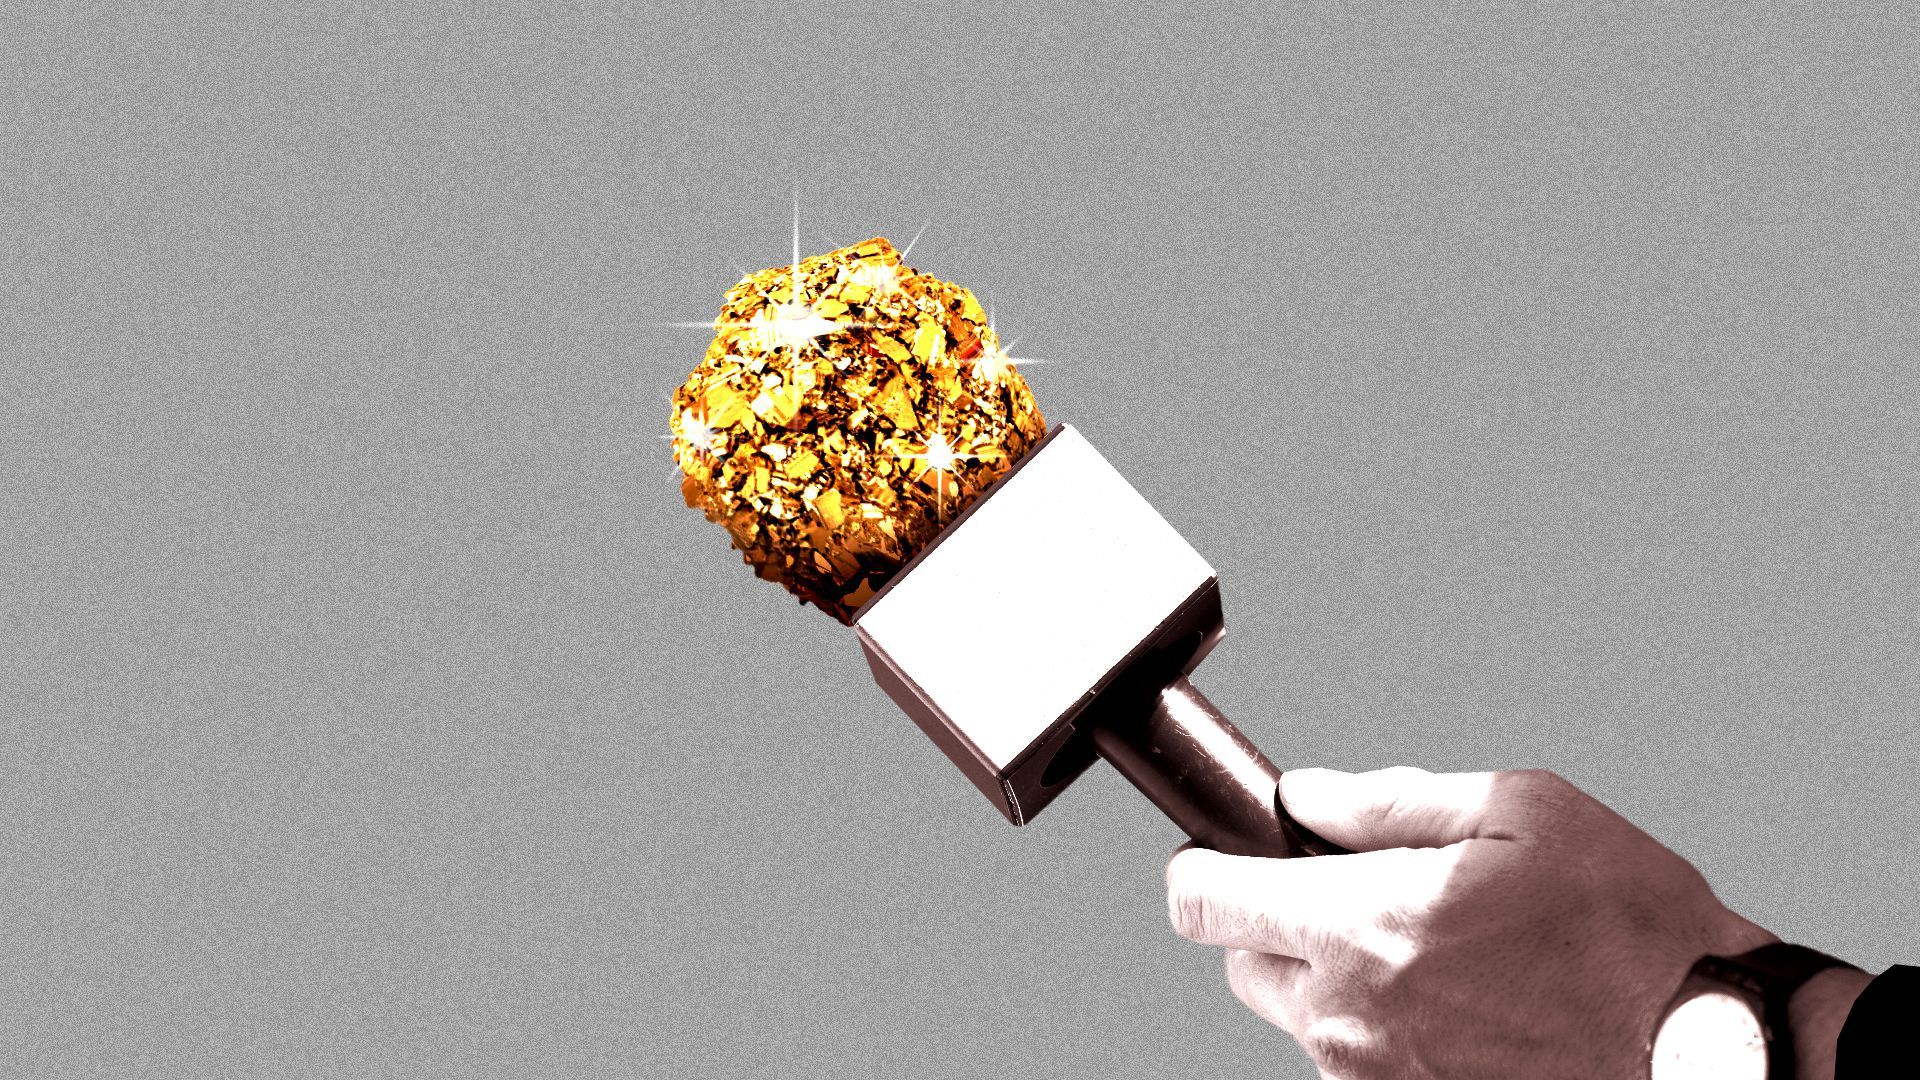 Illustration of a news microphone with a gold nugget for a top